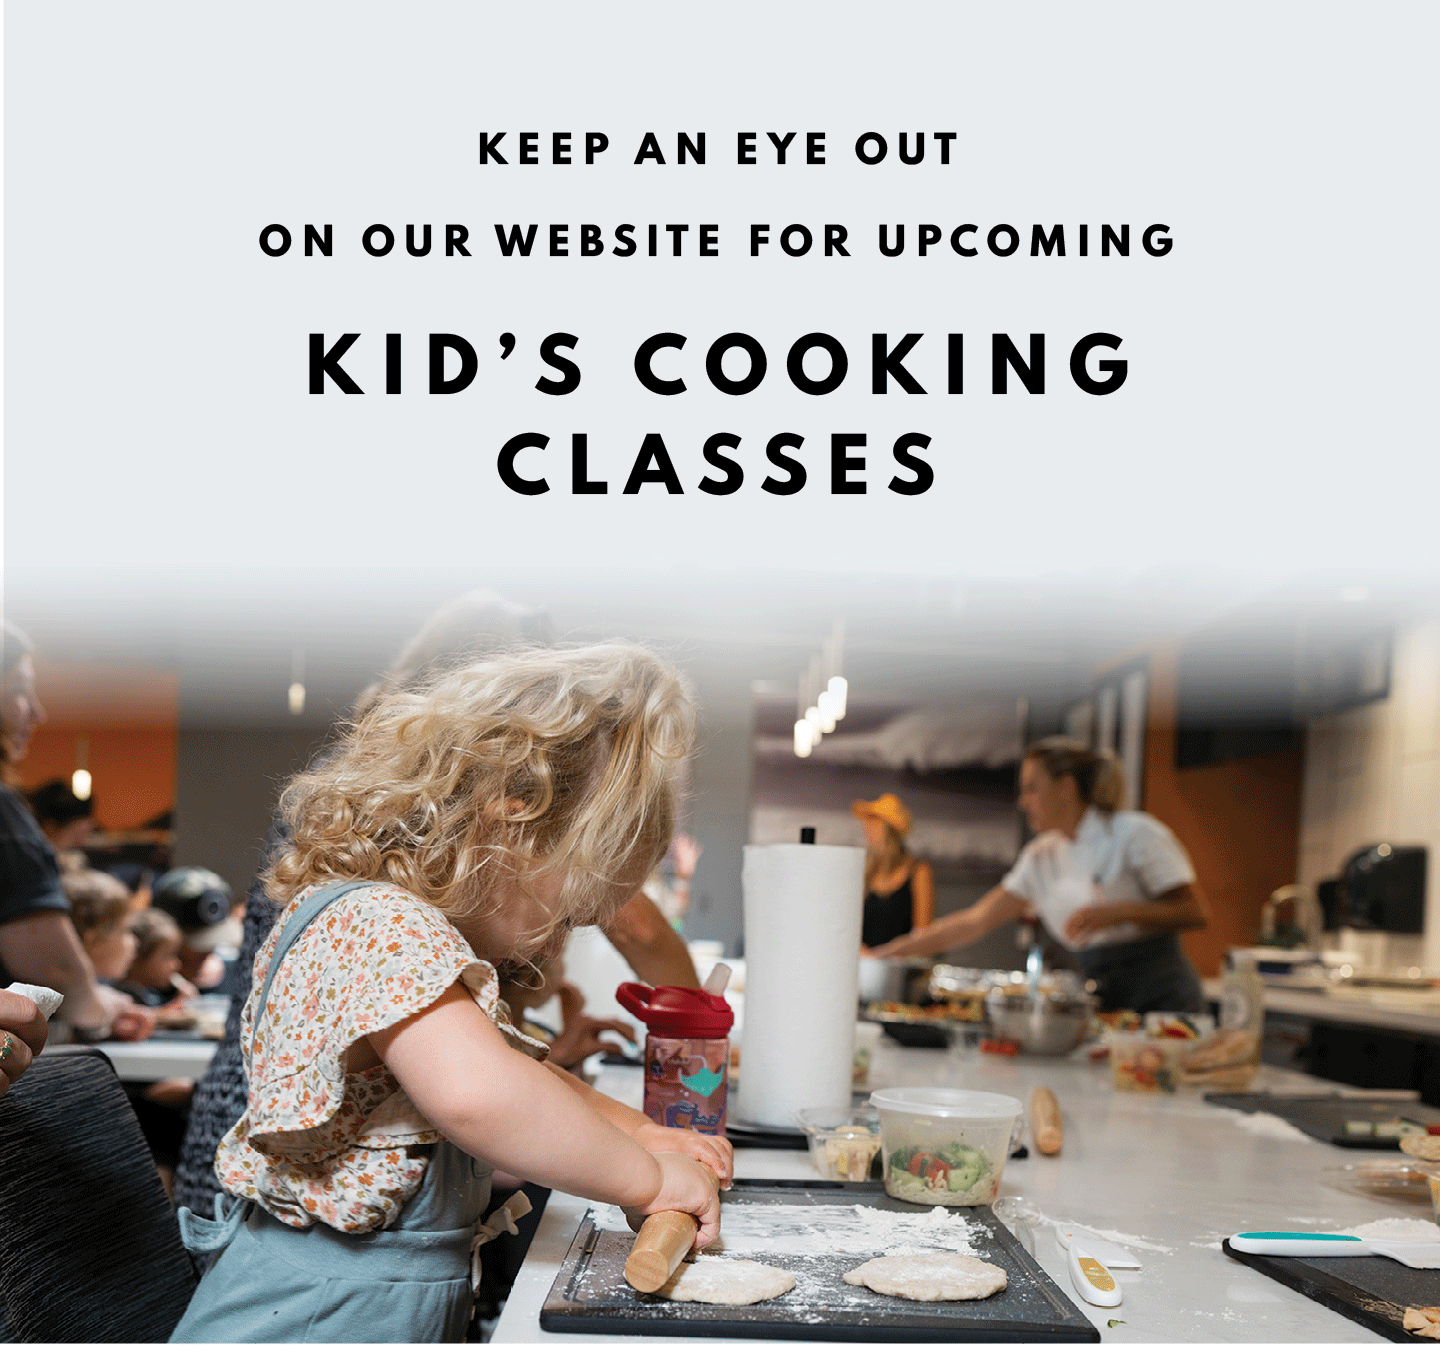 Keep an eye out for our Kid's Cooking Classes Annoucnements Coming Up!